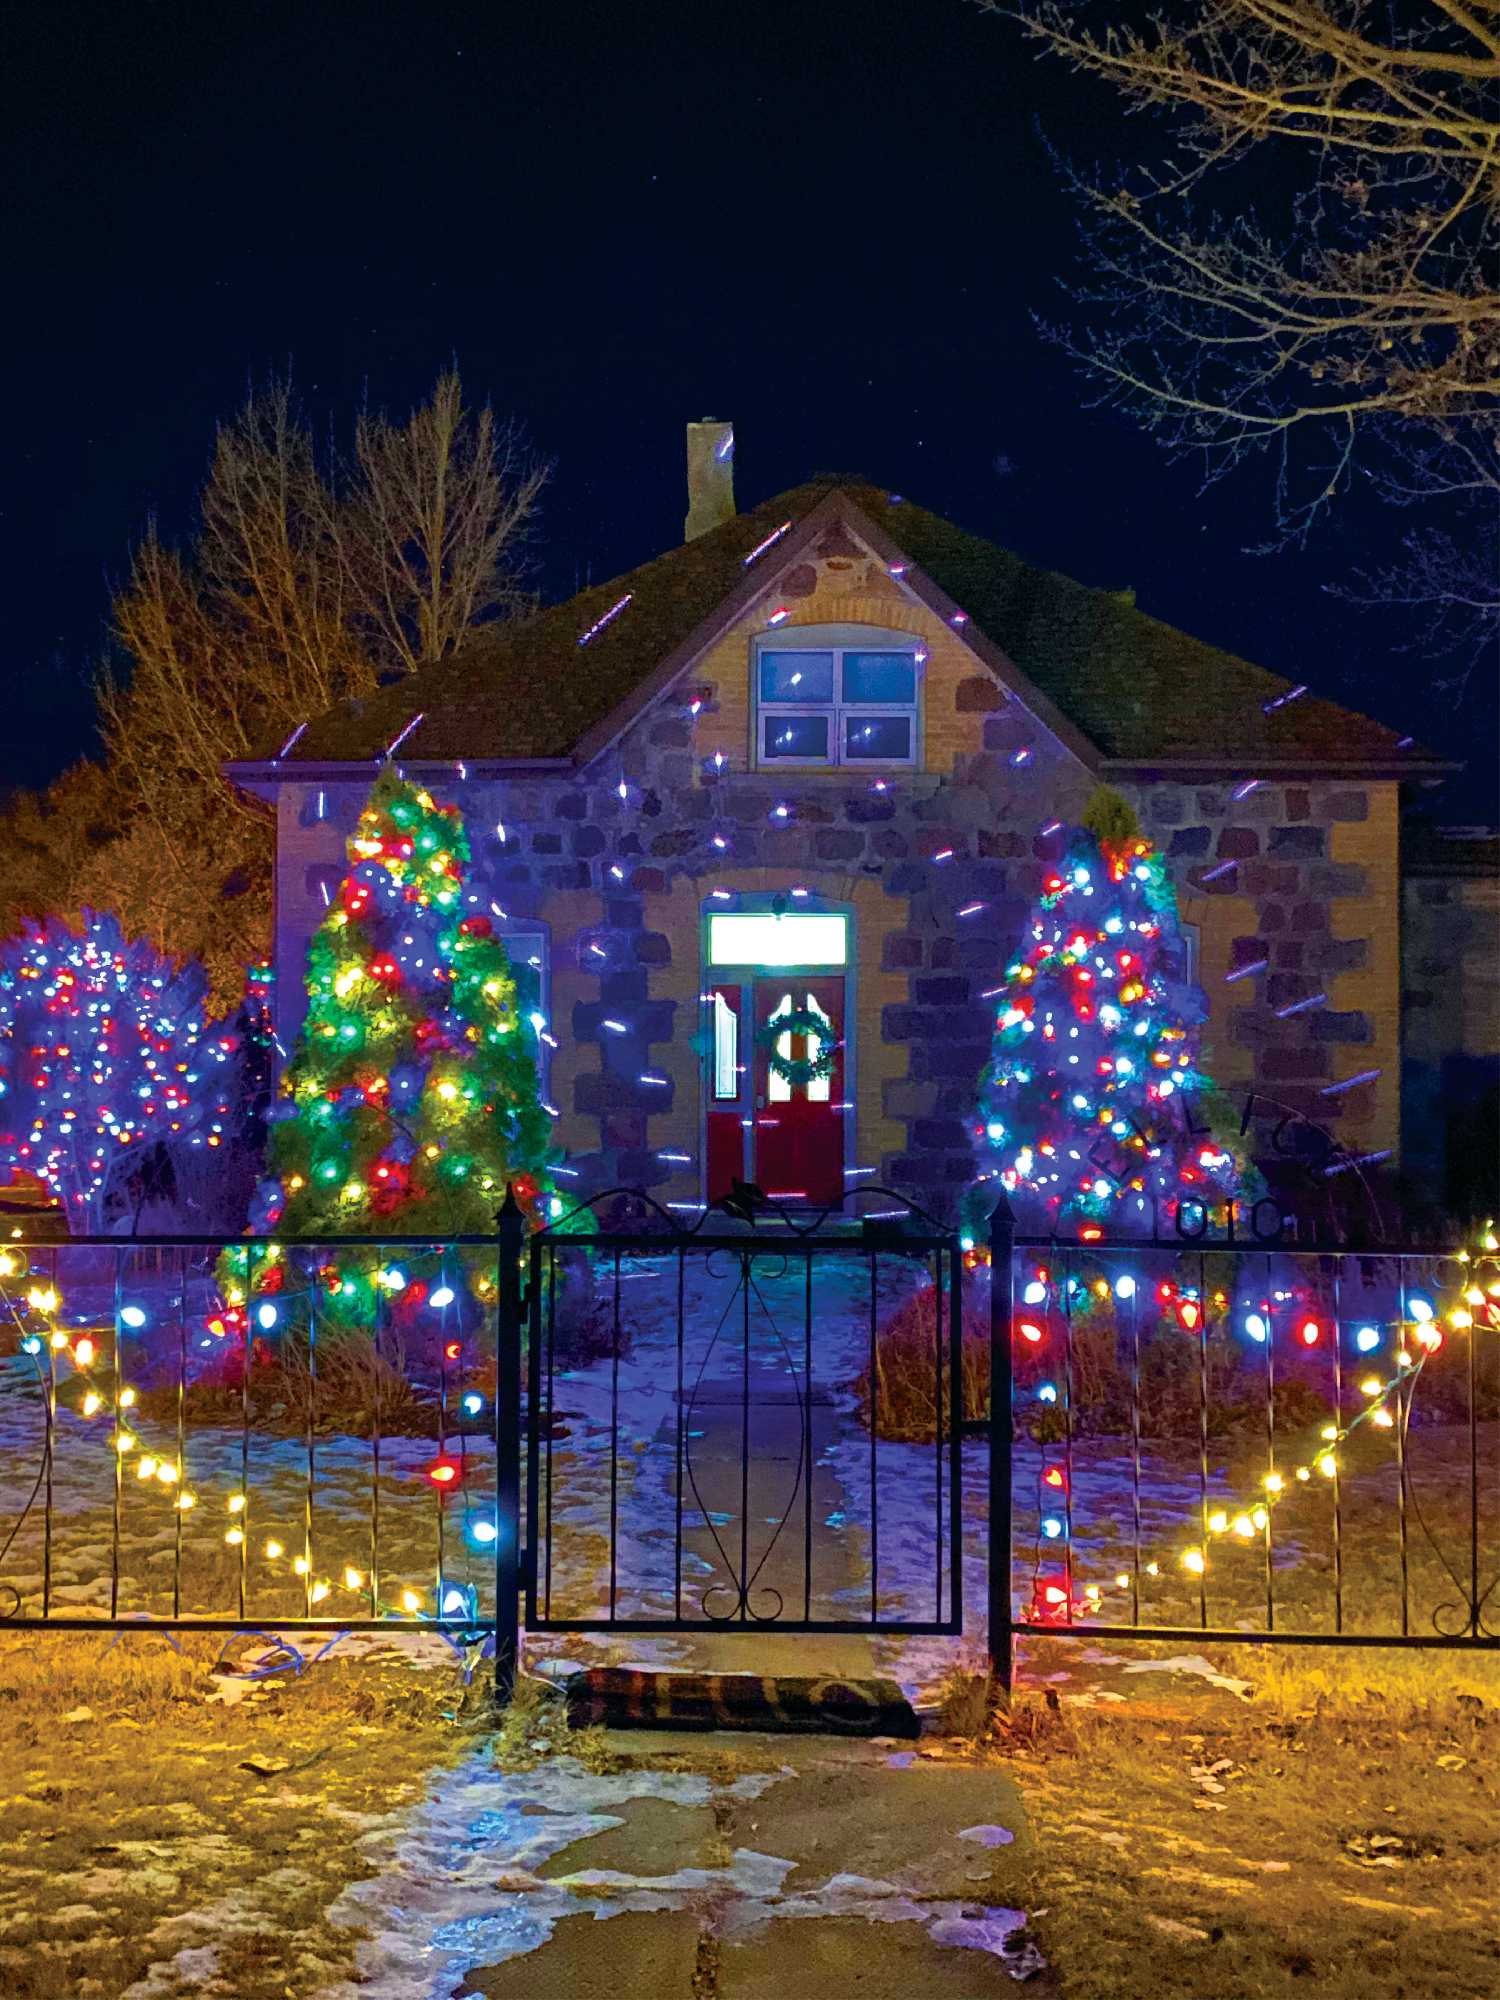 Some examples of homes showing off their festive spirit in the past. This year decorated homes can win prizes during the Twinkle Tour running from December 1 to 10.